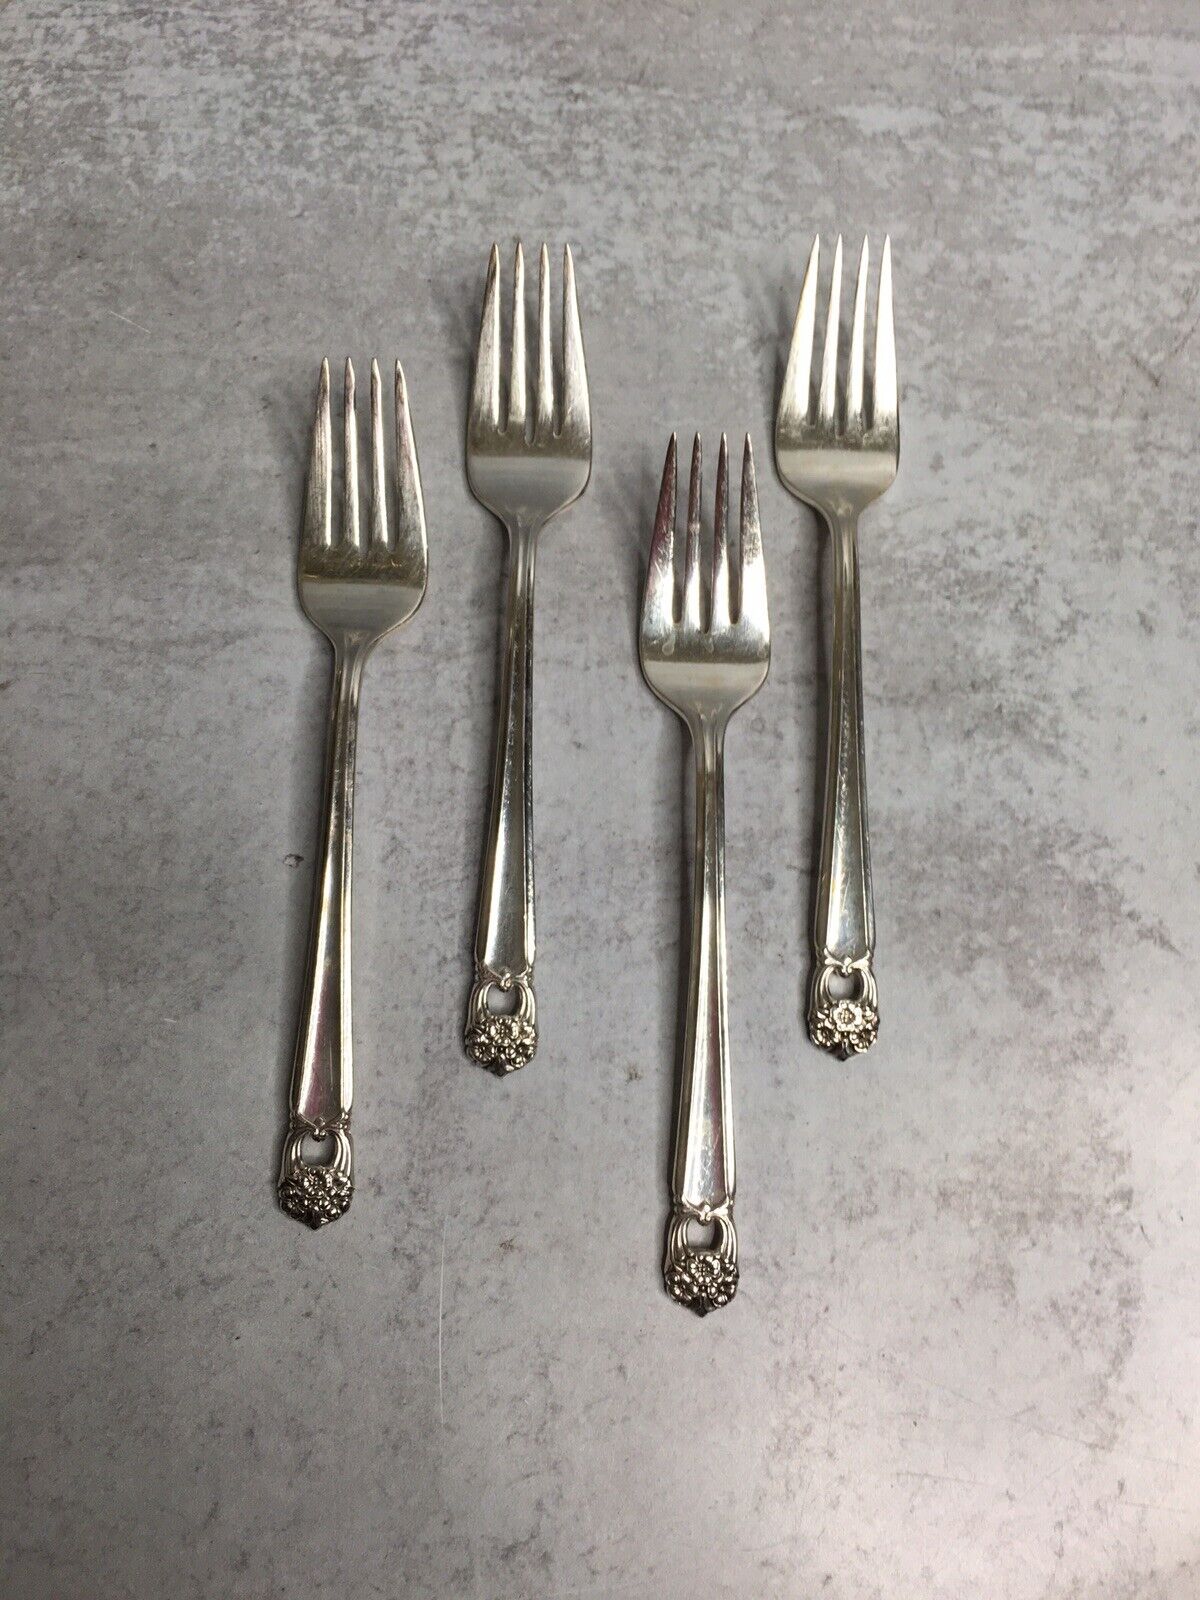 Eternally Yours 1847 ROGERS BROS IS Silverplate 4 SALAD FORKS 6.75"